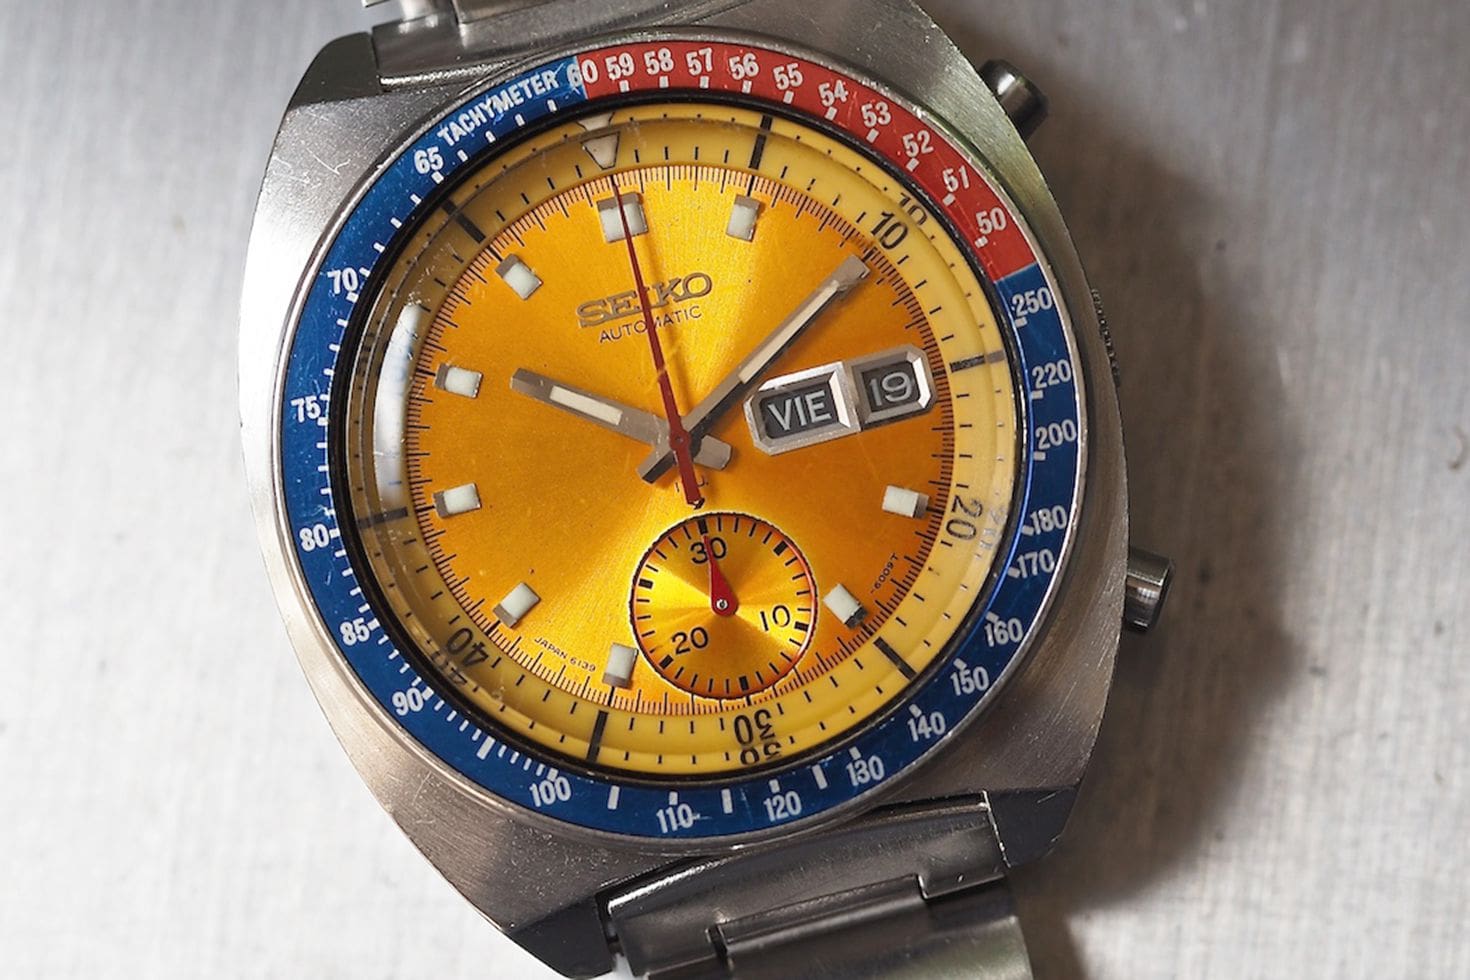 Why Seiko won't be producing a 50th anniversary chronograph